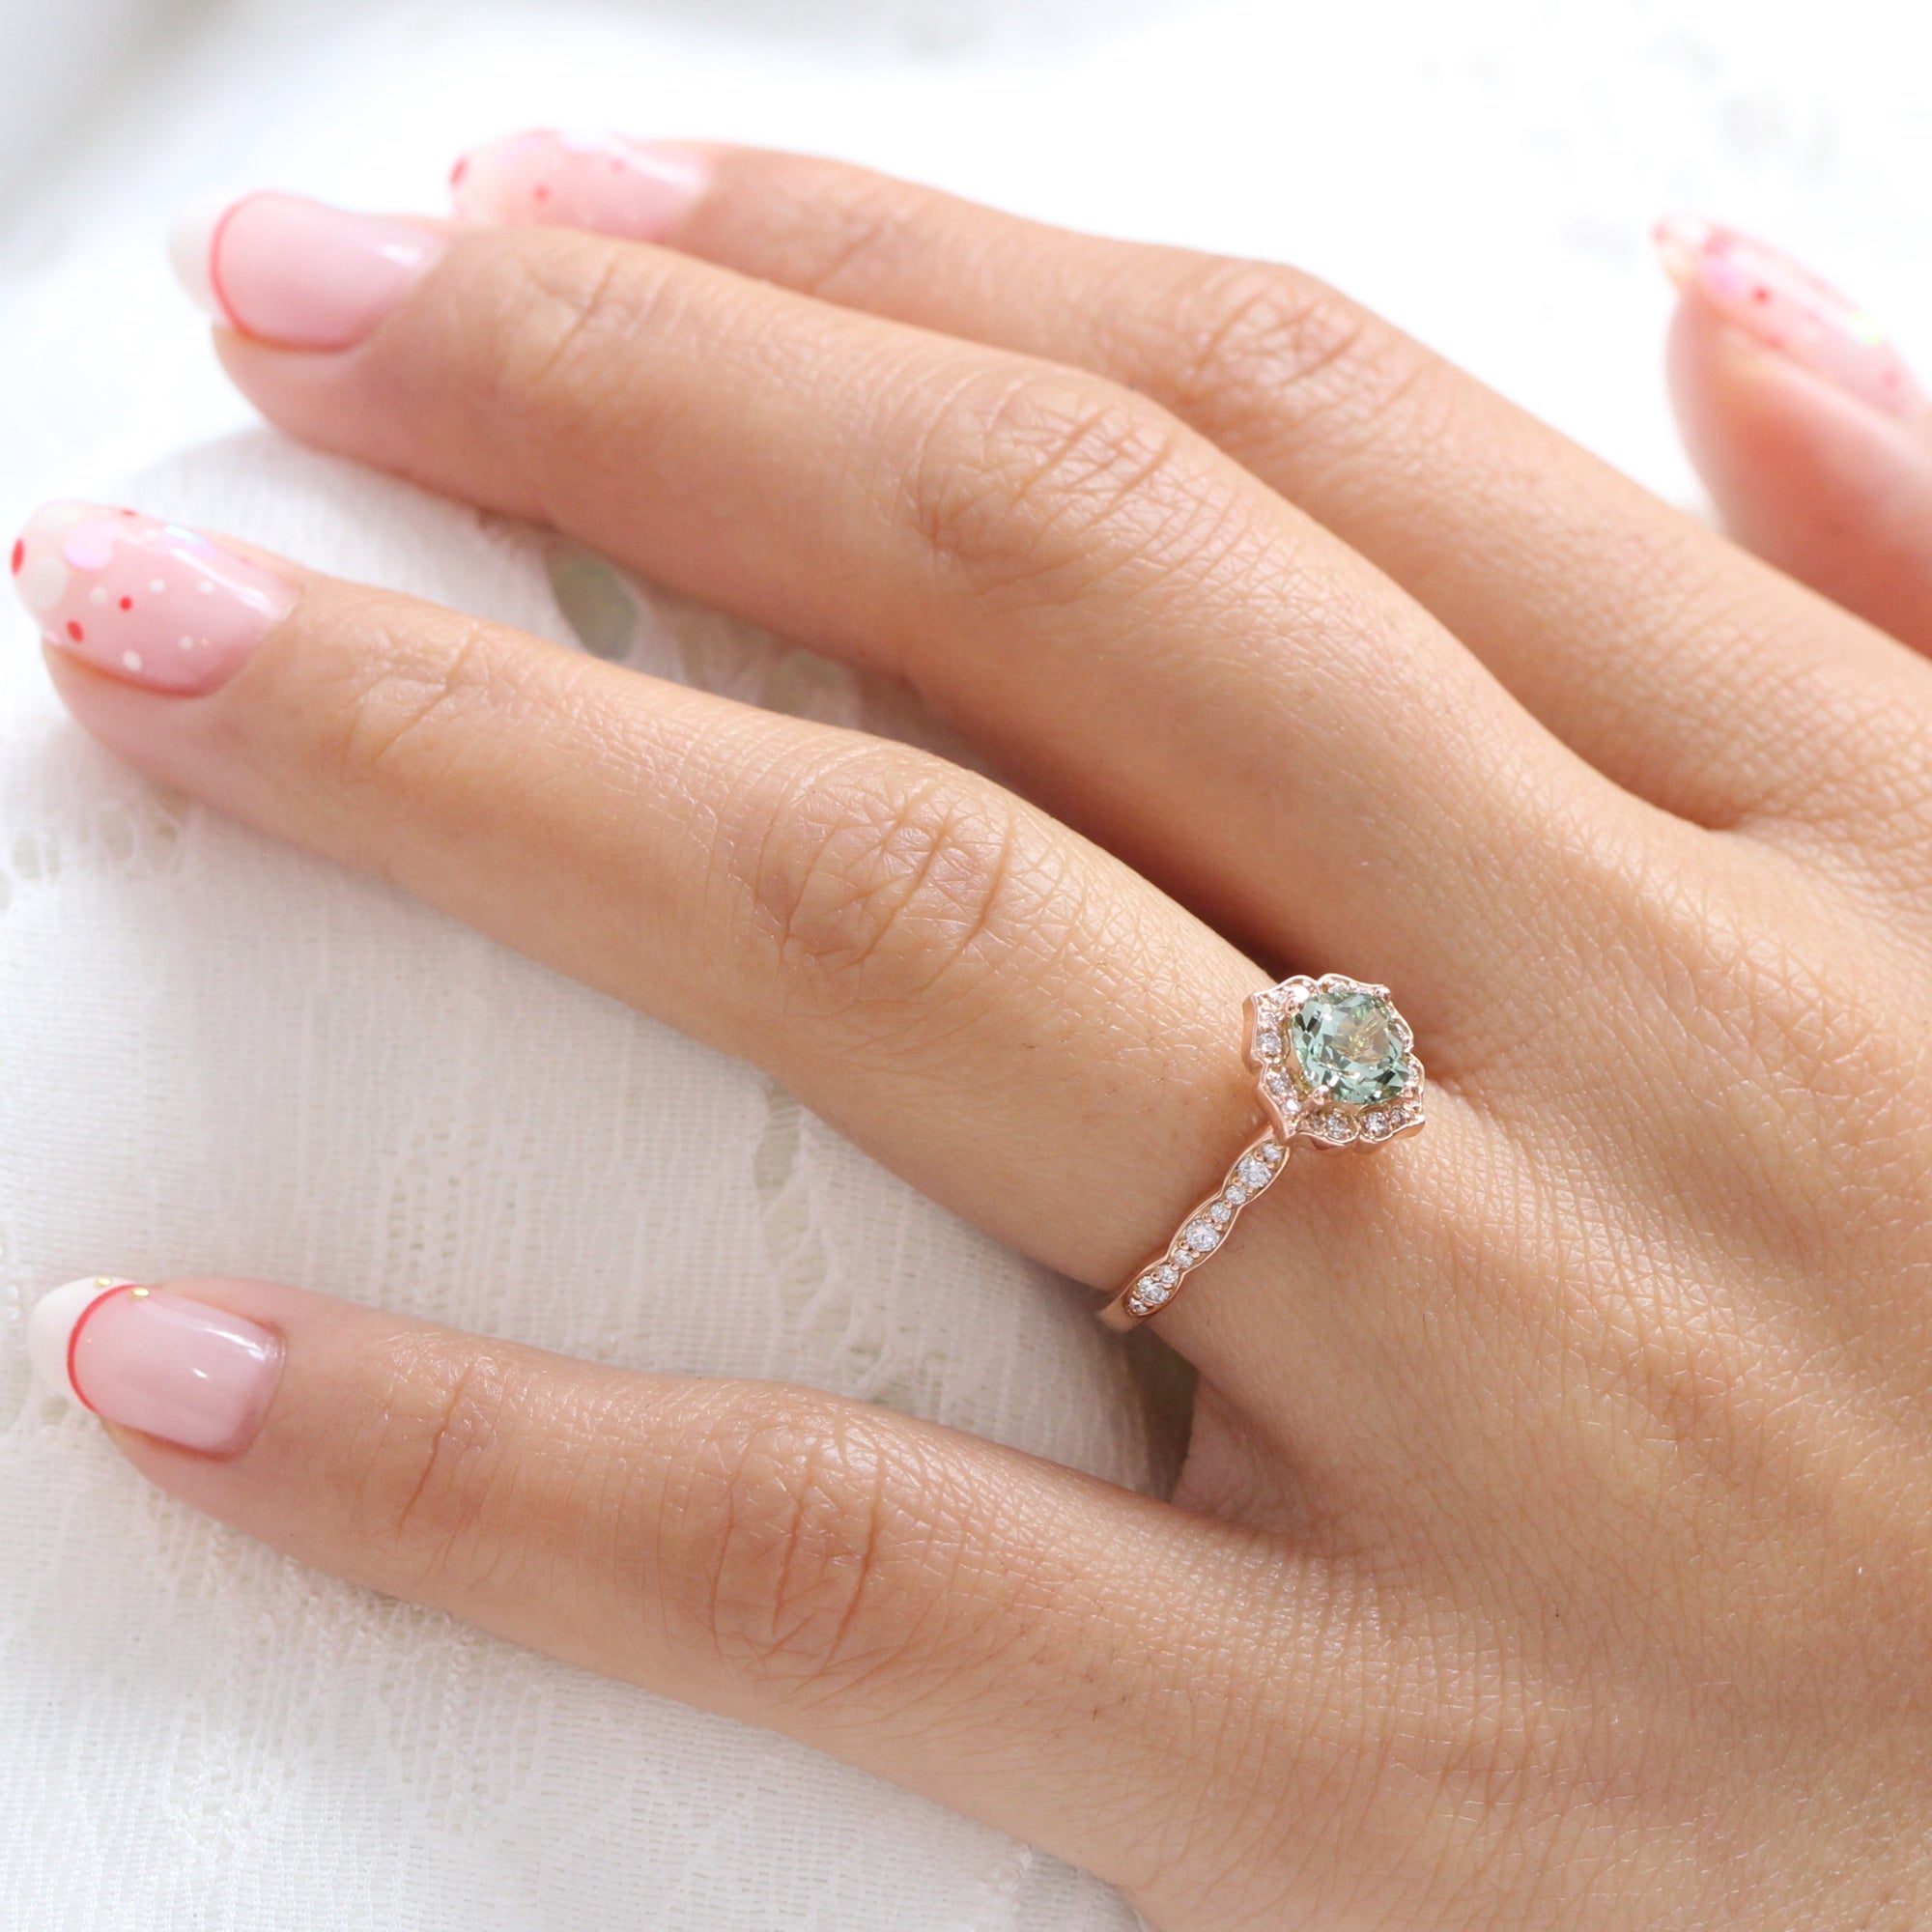 Mini Vintage Floral Sea-foam Green Sapphire Ring in 14k Rose Gold Scalloped Diamond Band, Size 6.25